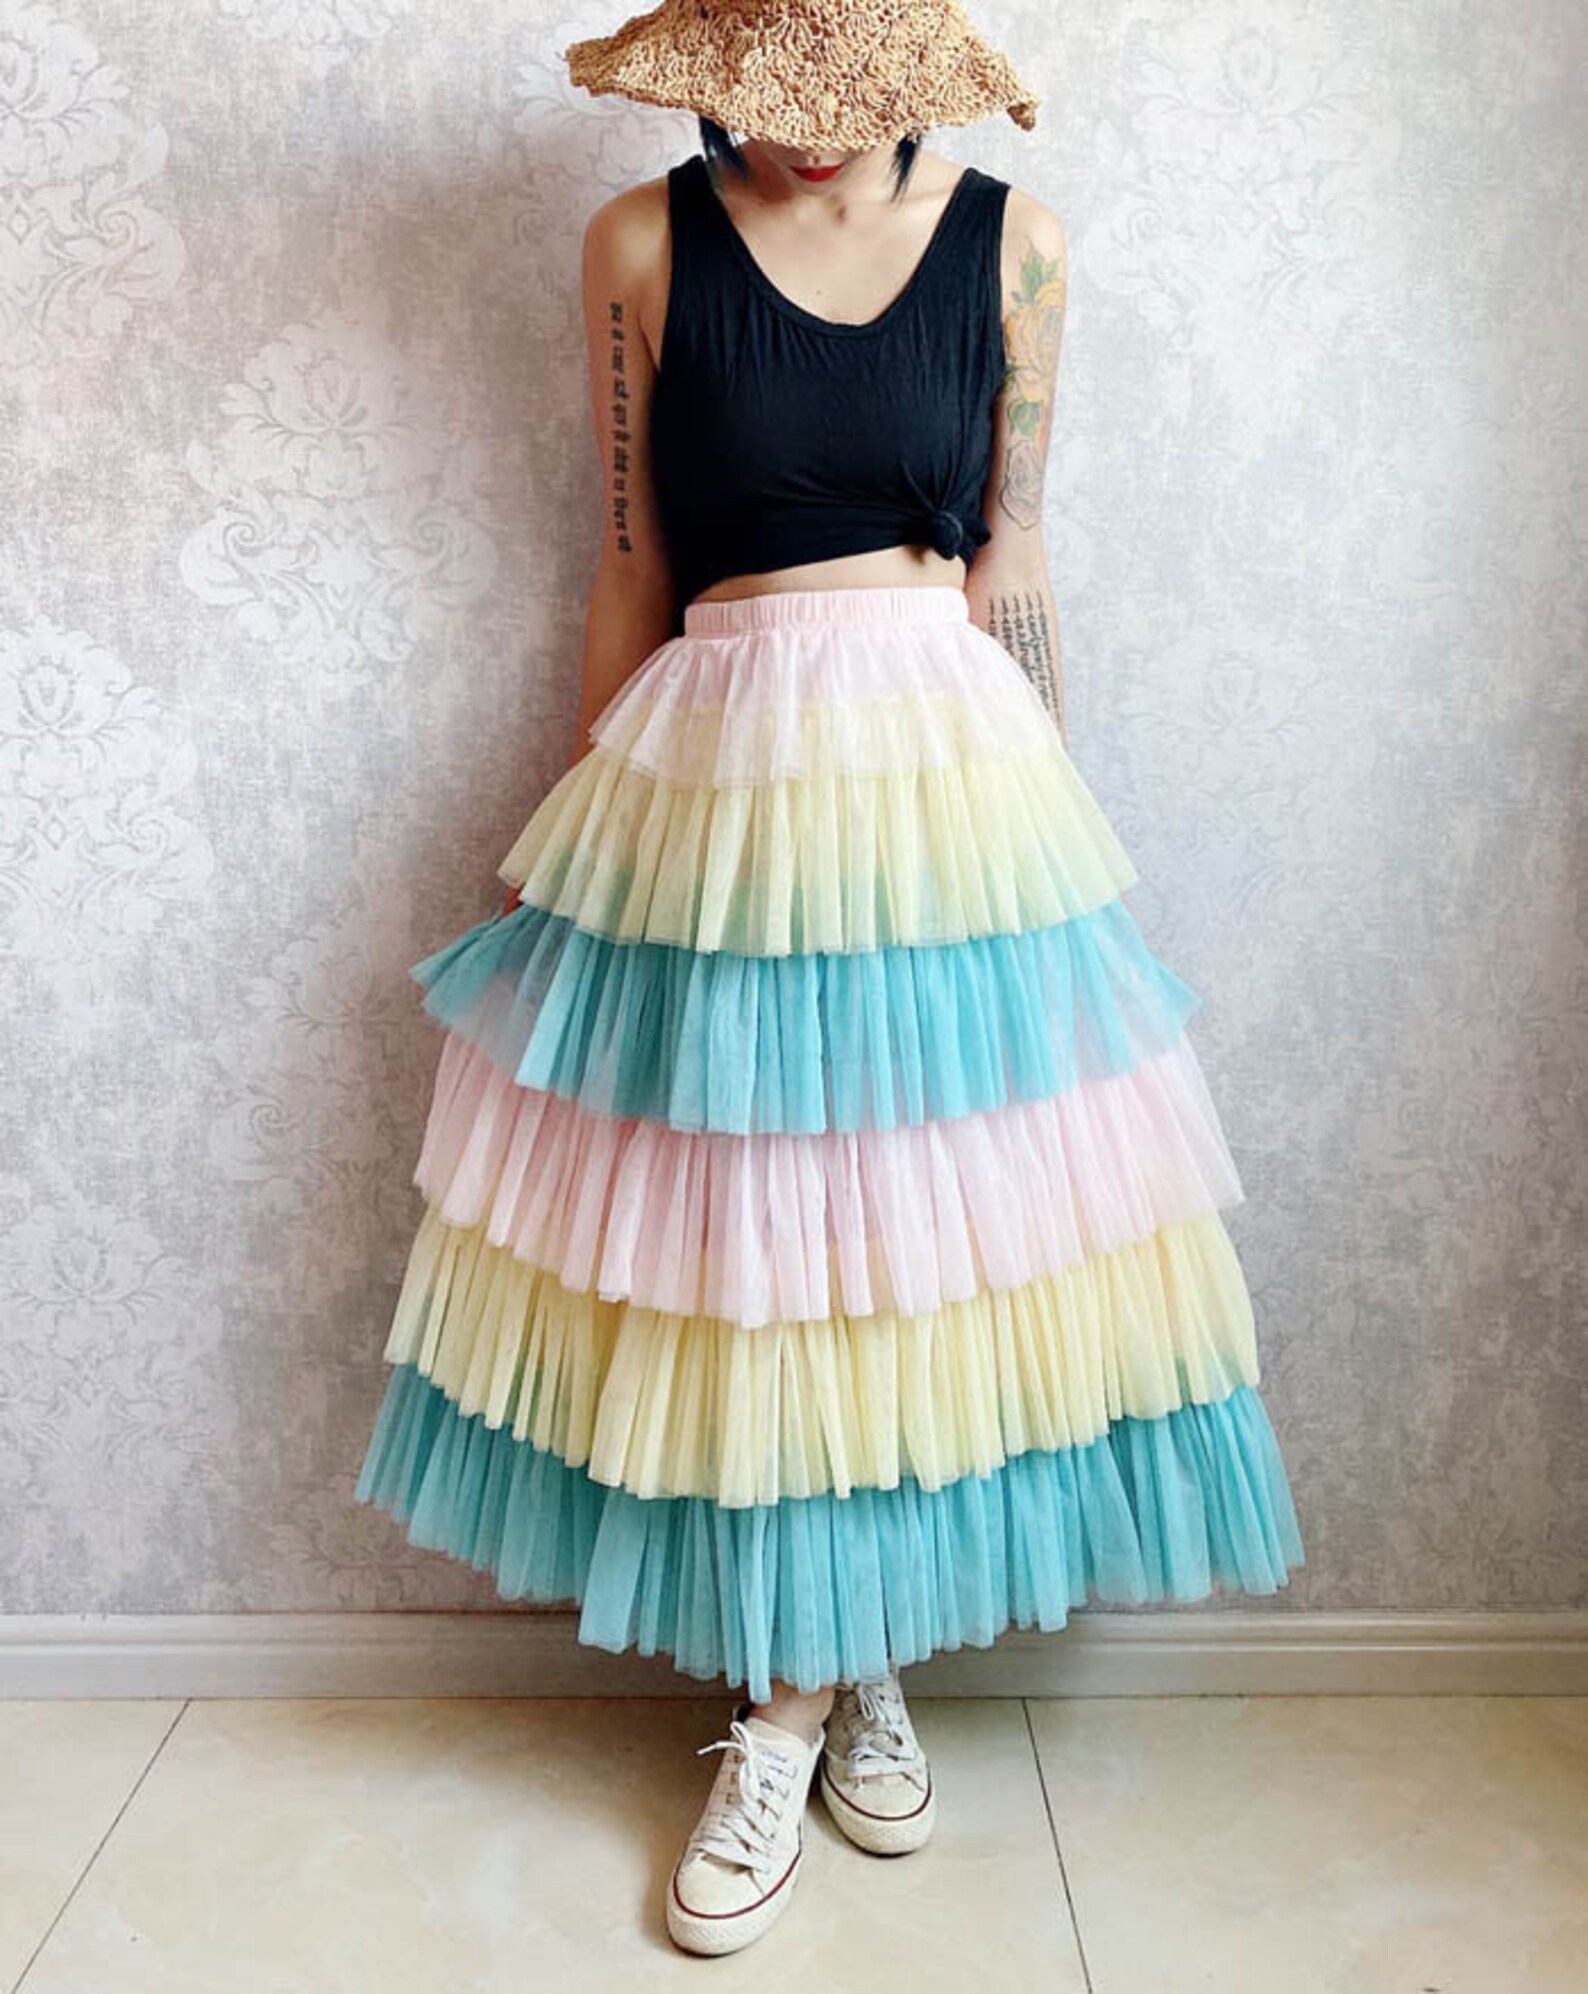 Adult Tulle Skirt Cupcake Skirt Photo Shoot Party - Etsy